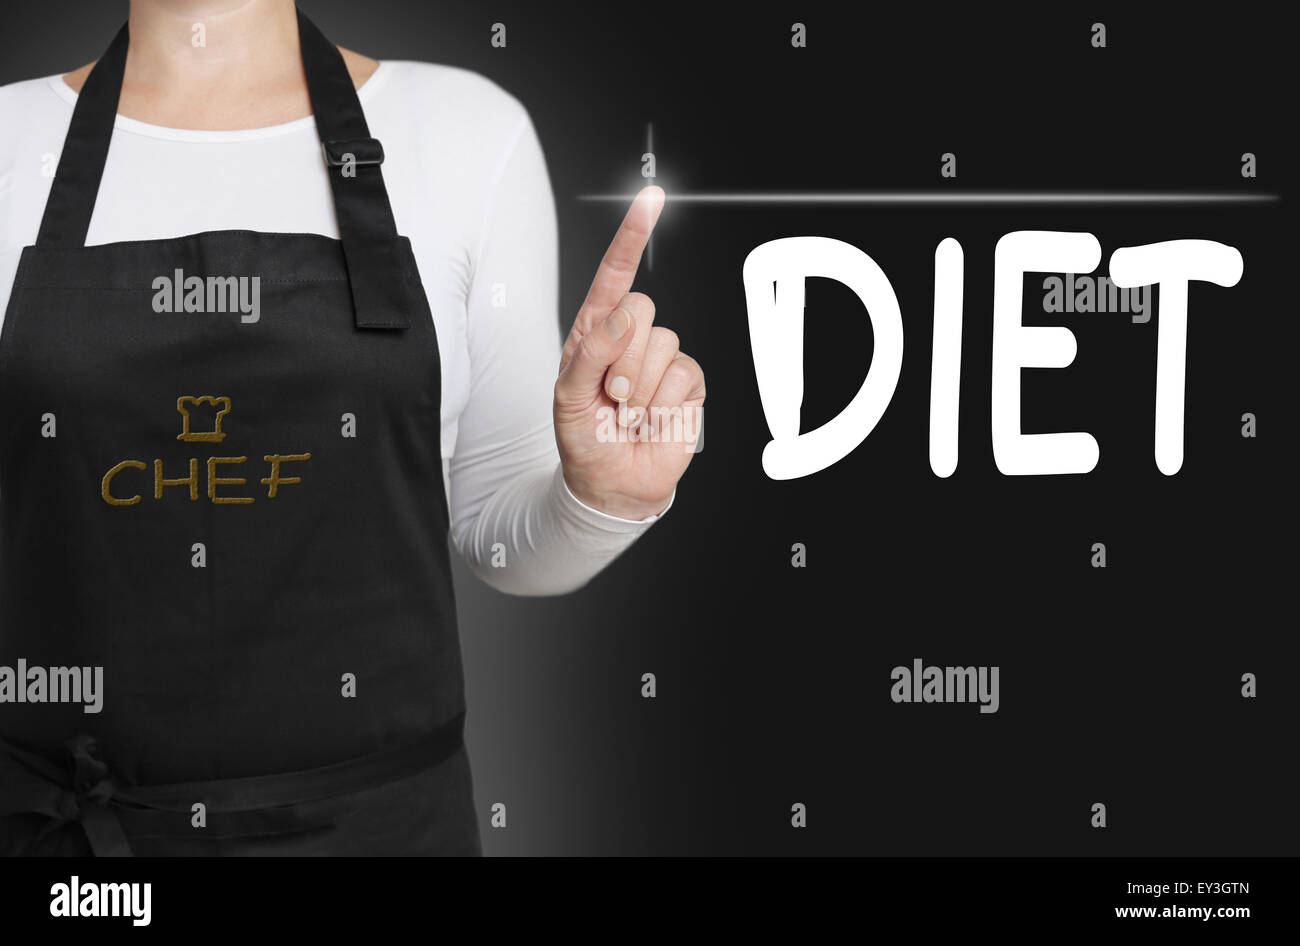 diet touchscreen is operated by cook. Stock Photo